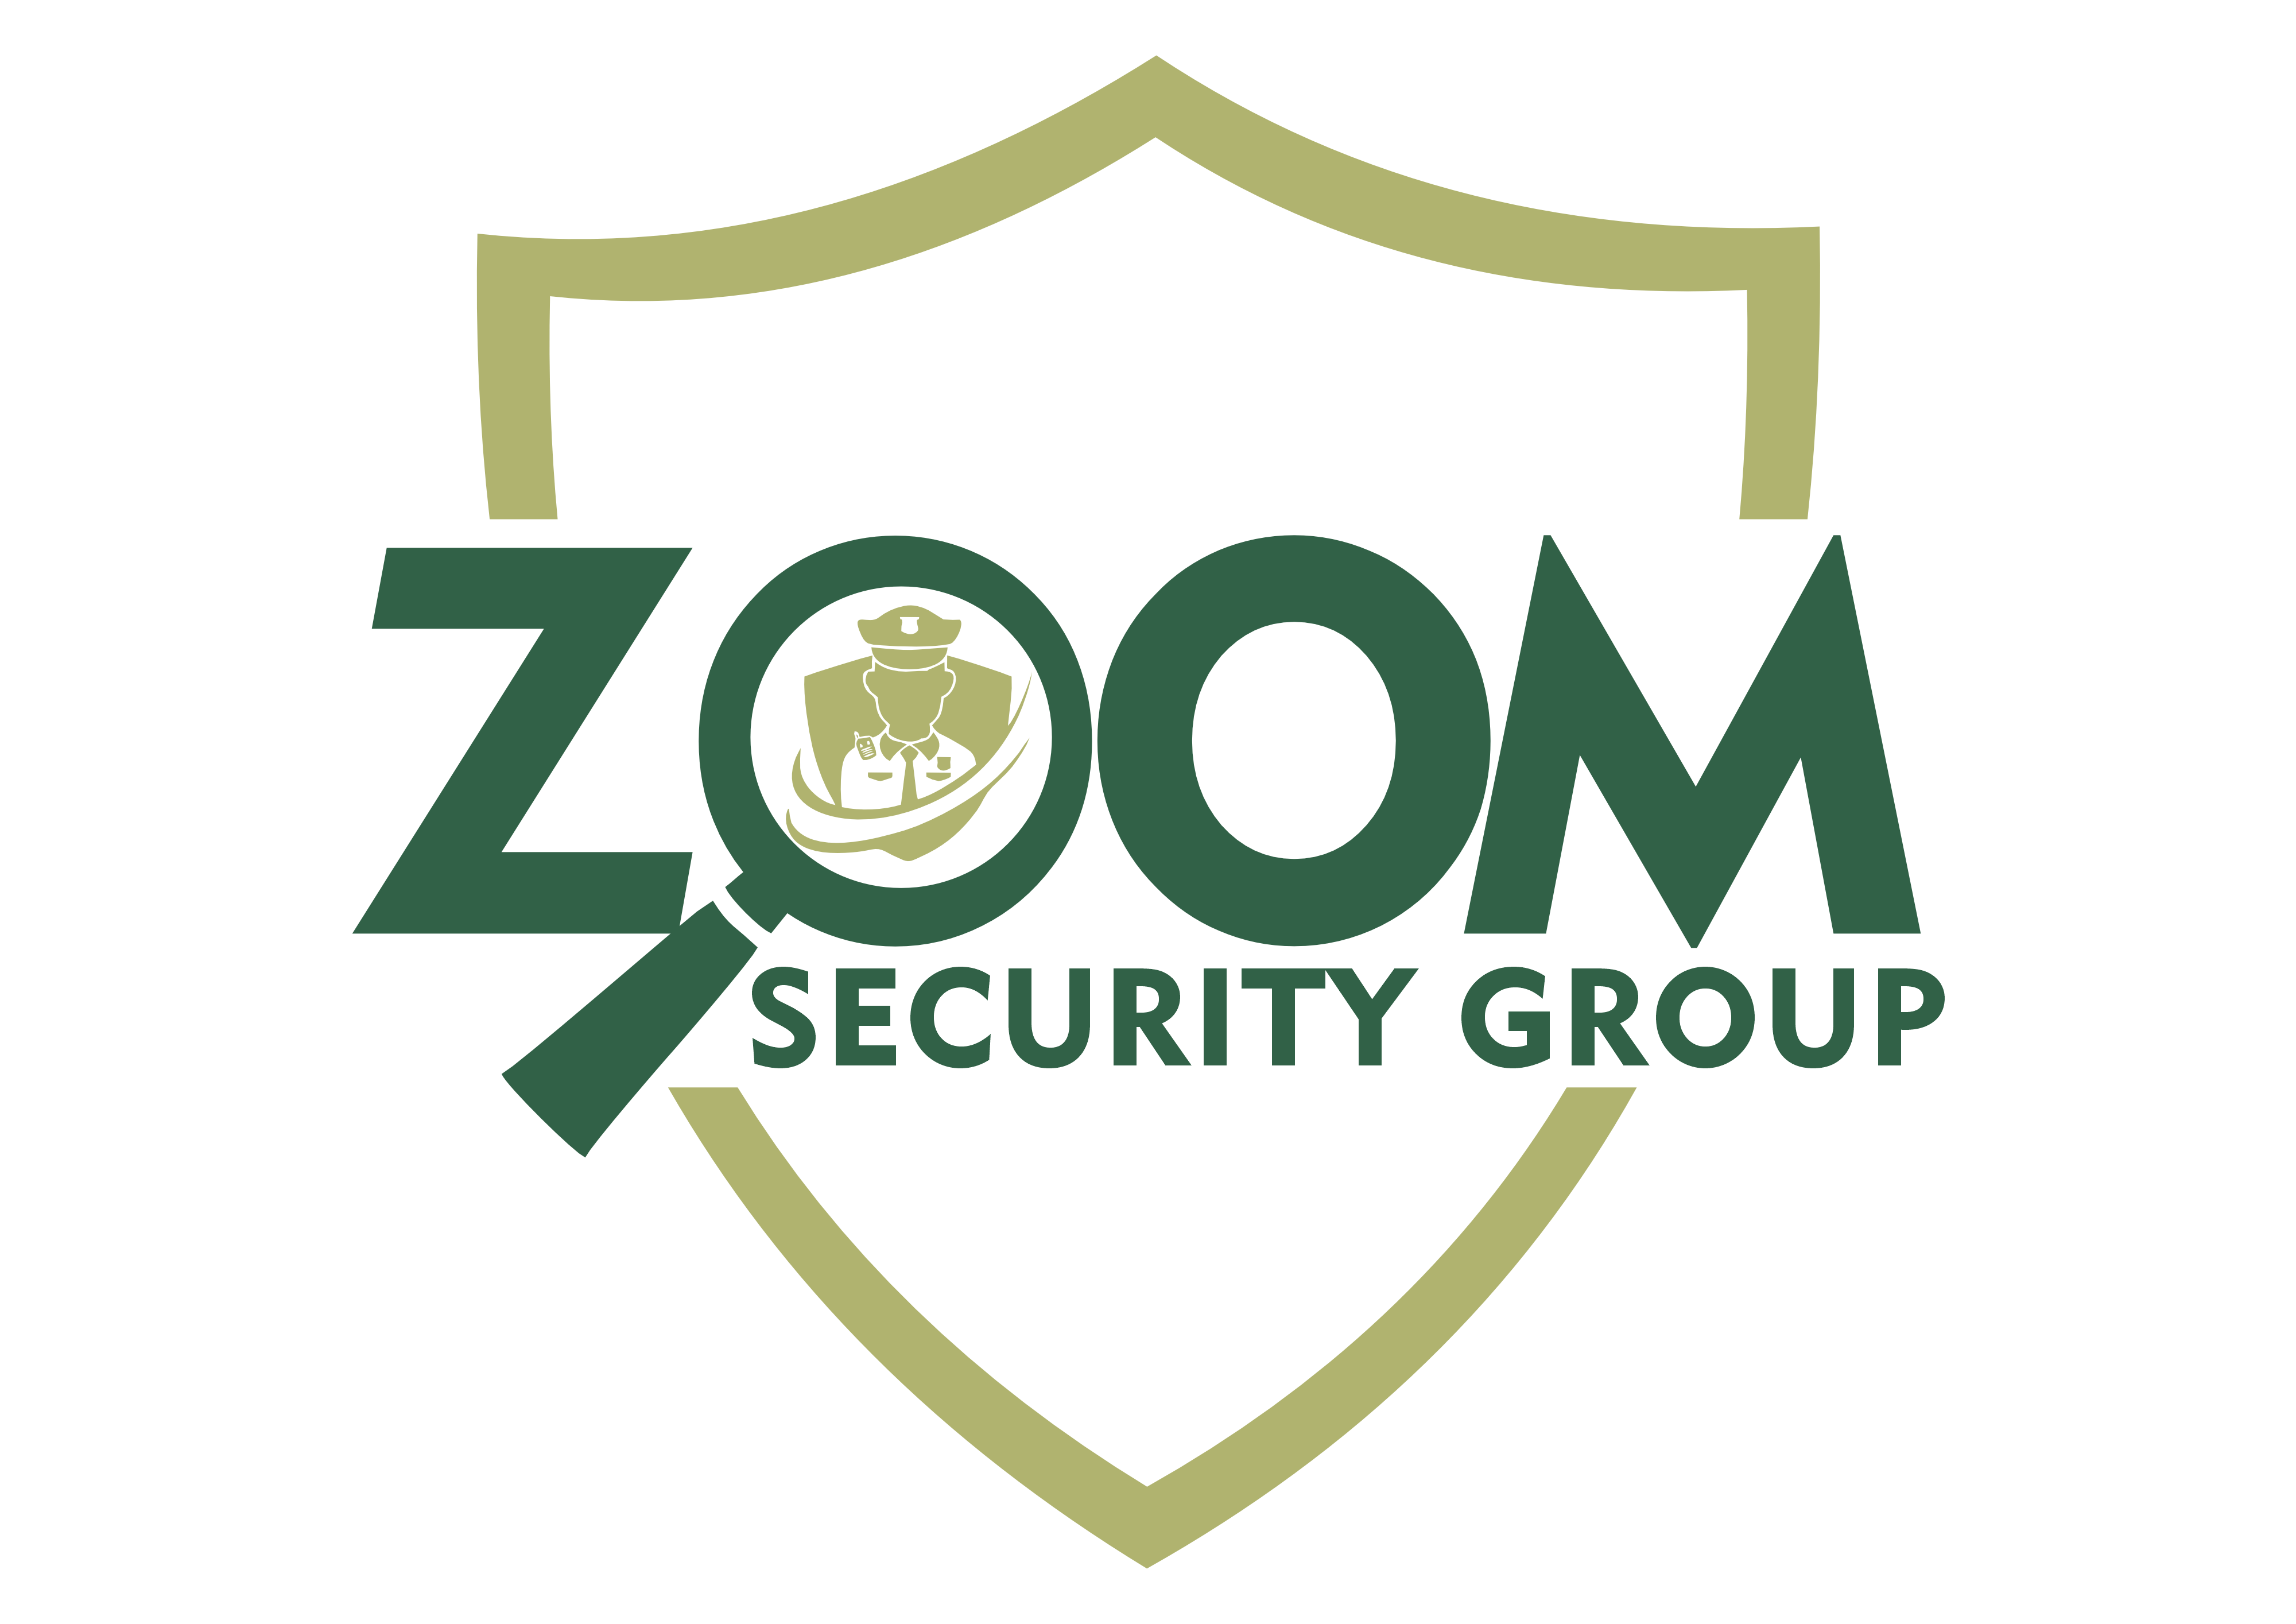 Zoom Security Group